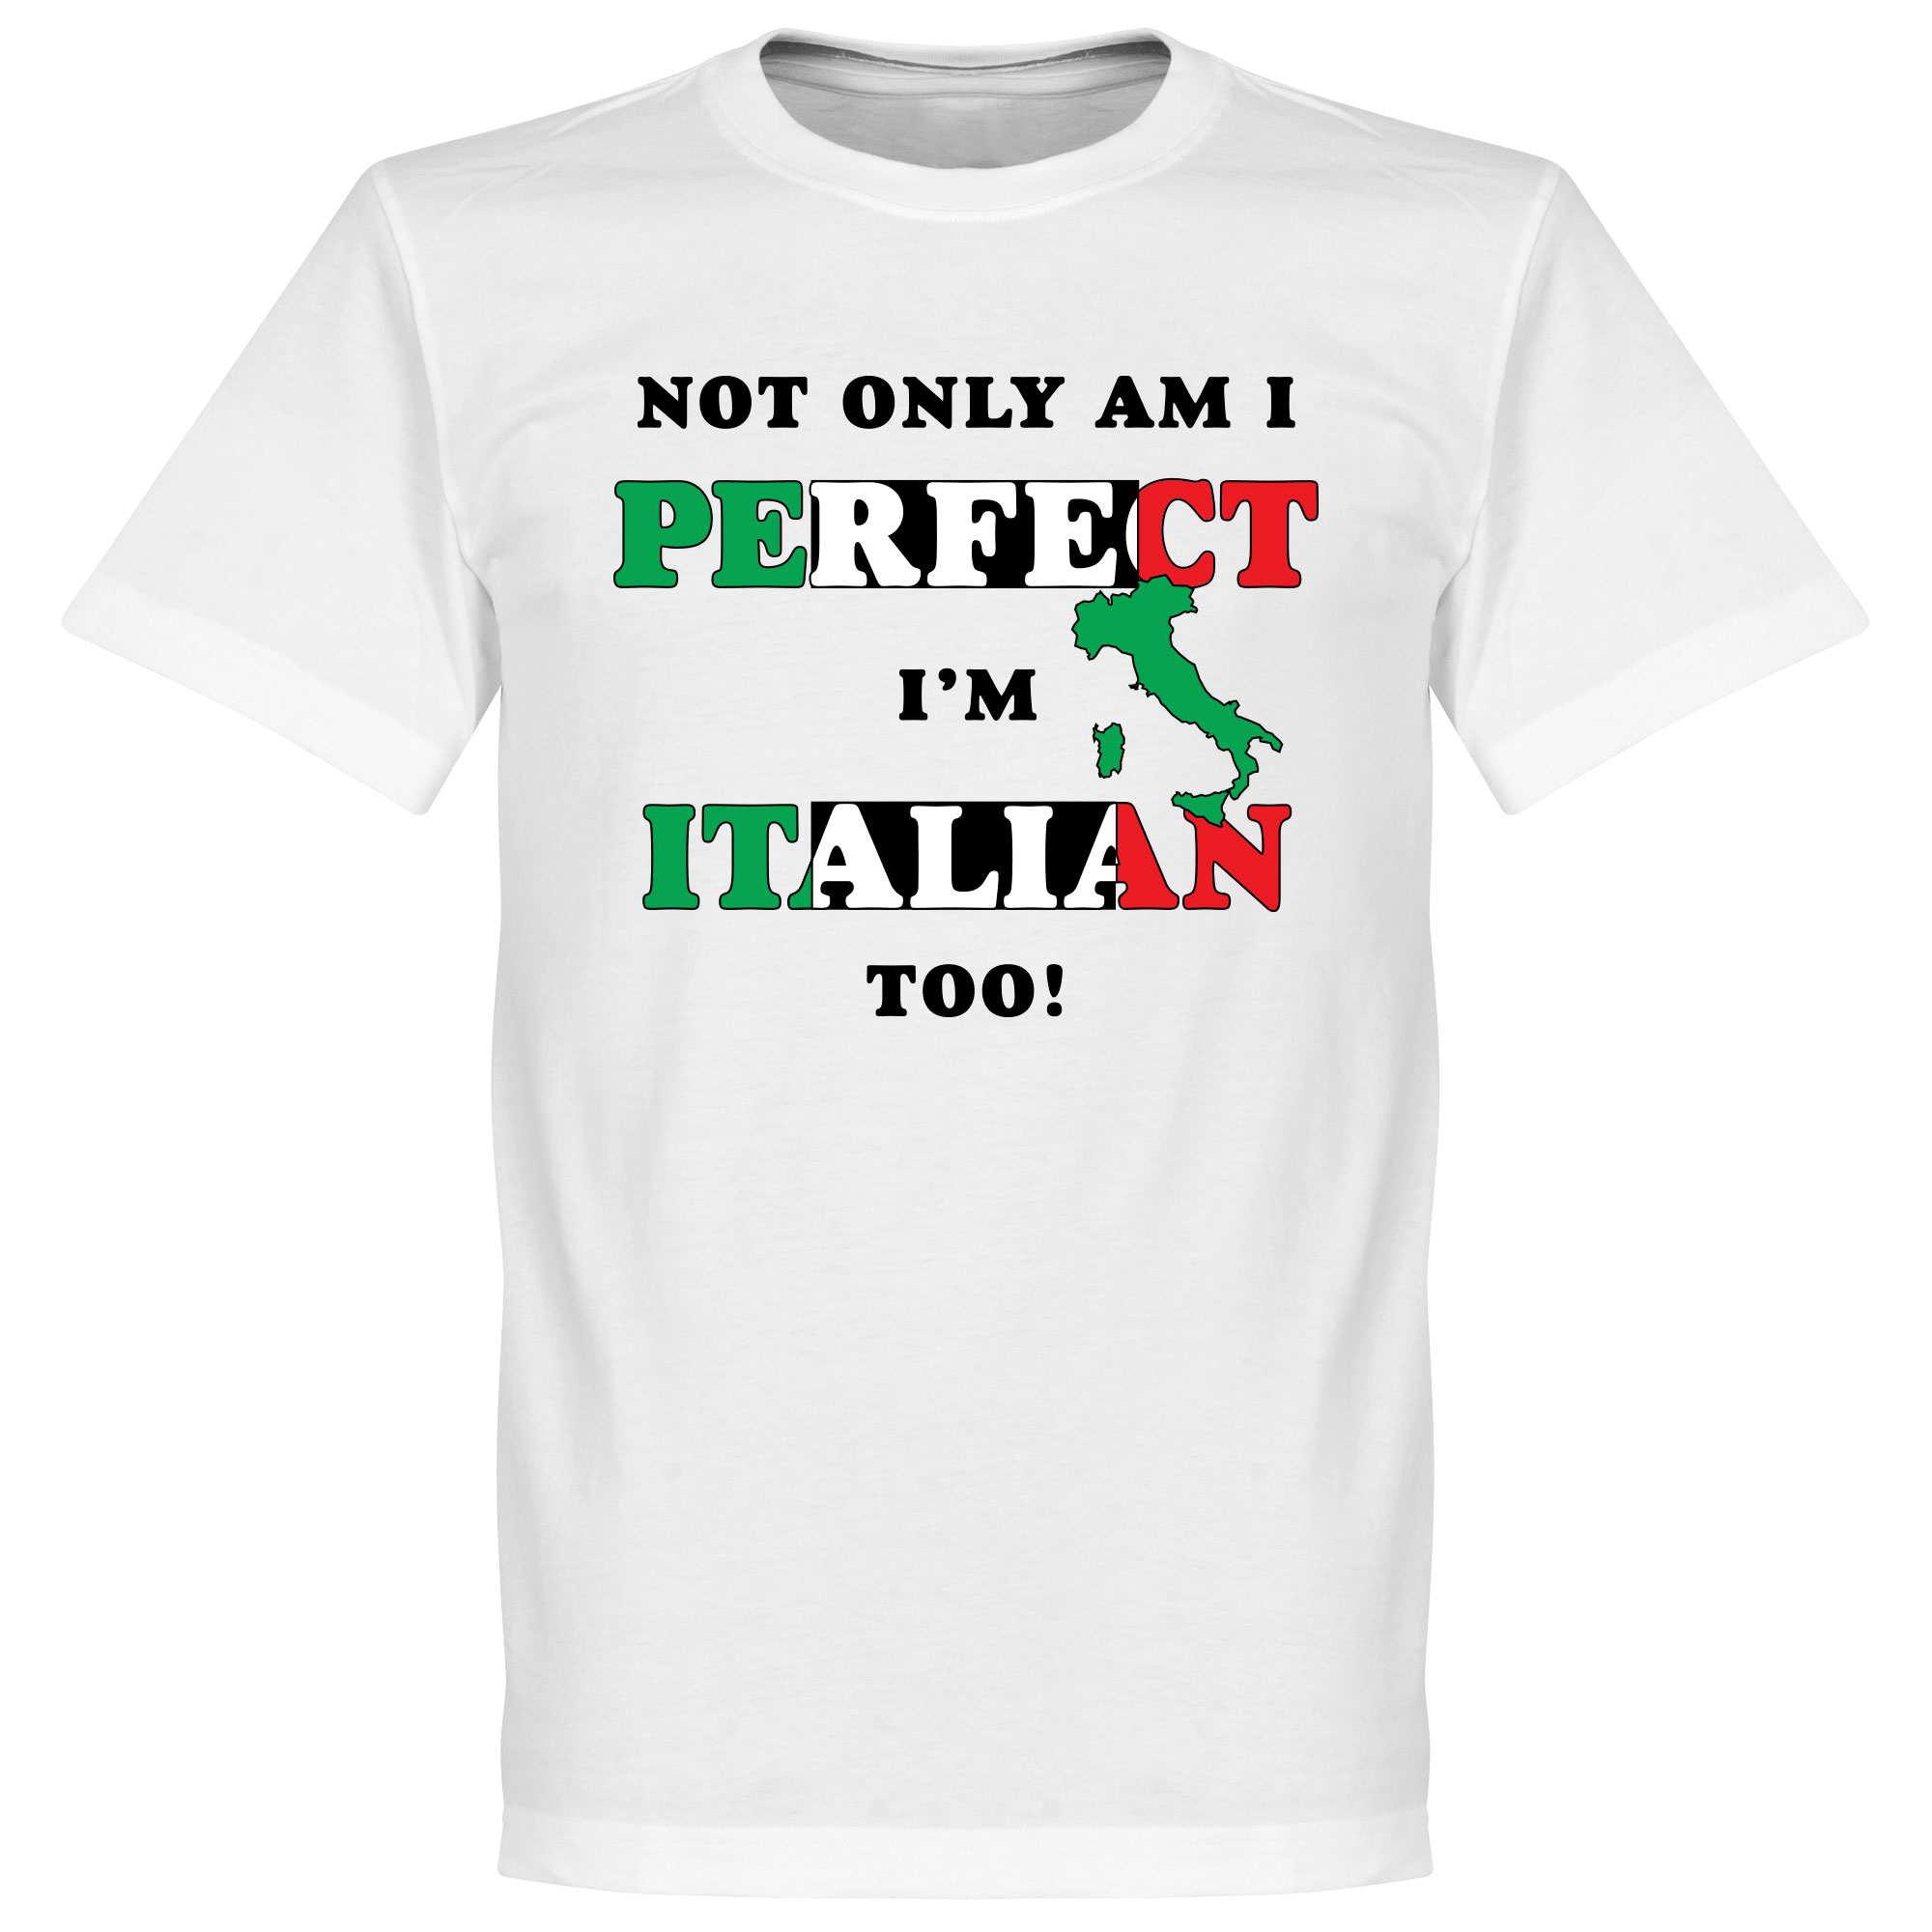 Not Only Am I Perfect, I'm Italian Too! T-Shirt S